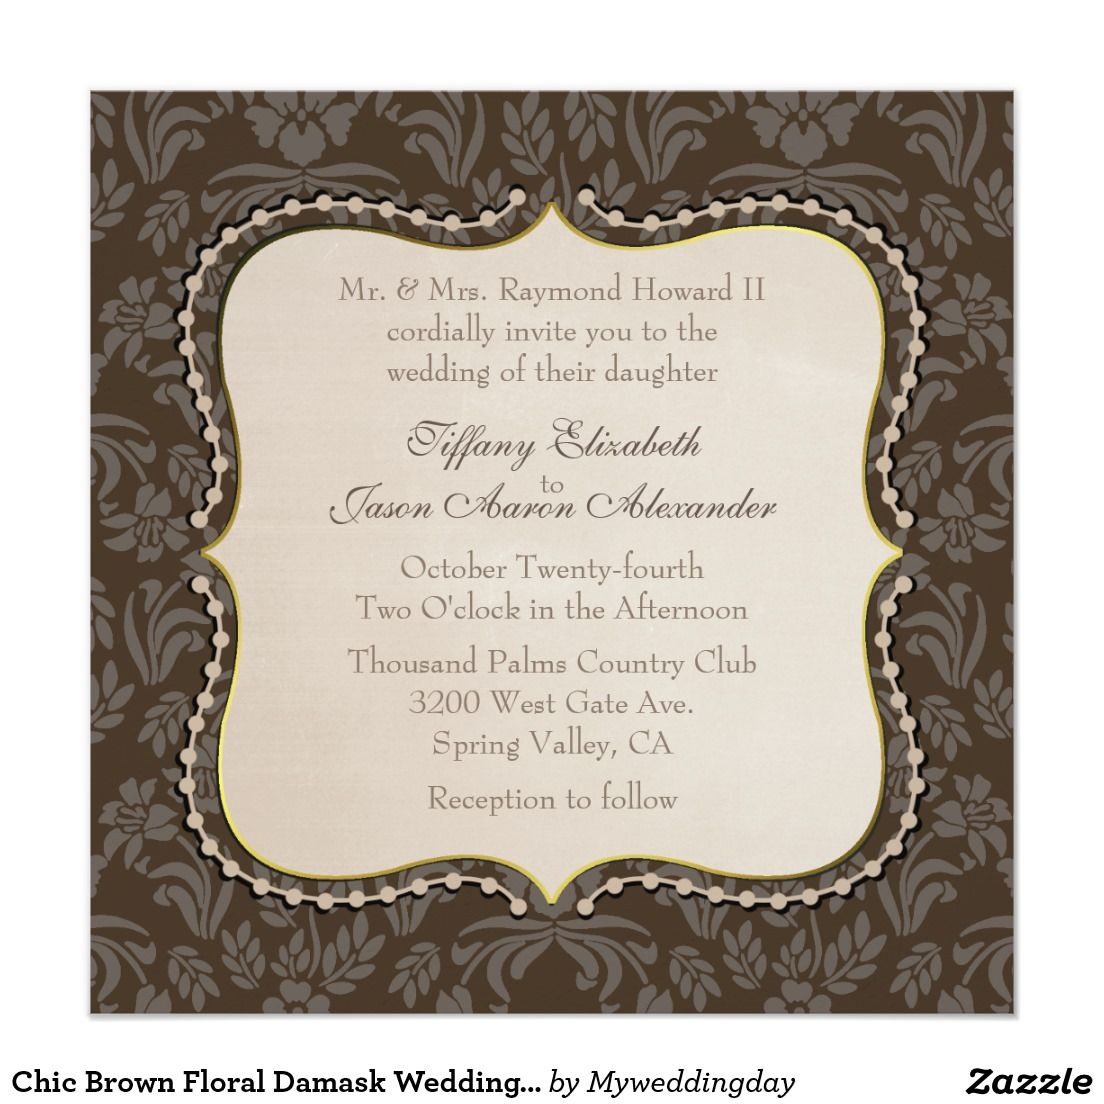 Damask Wedding Invitations Chic Brown Floral Damask Wedding Invitation Wedding Invitations